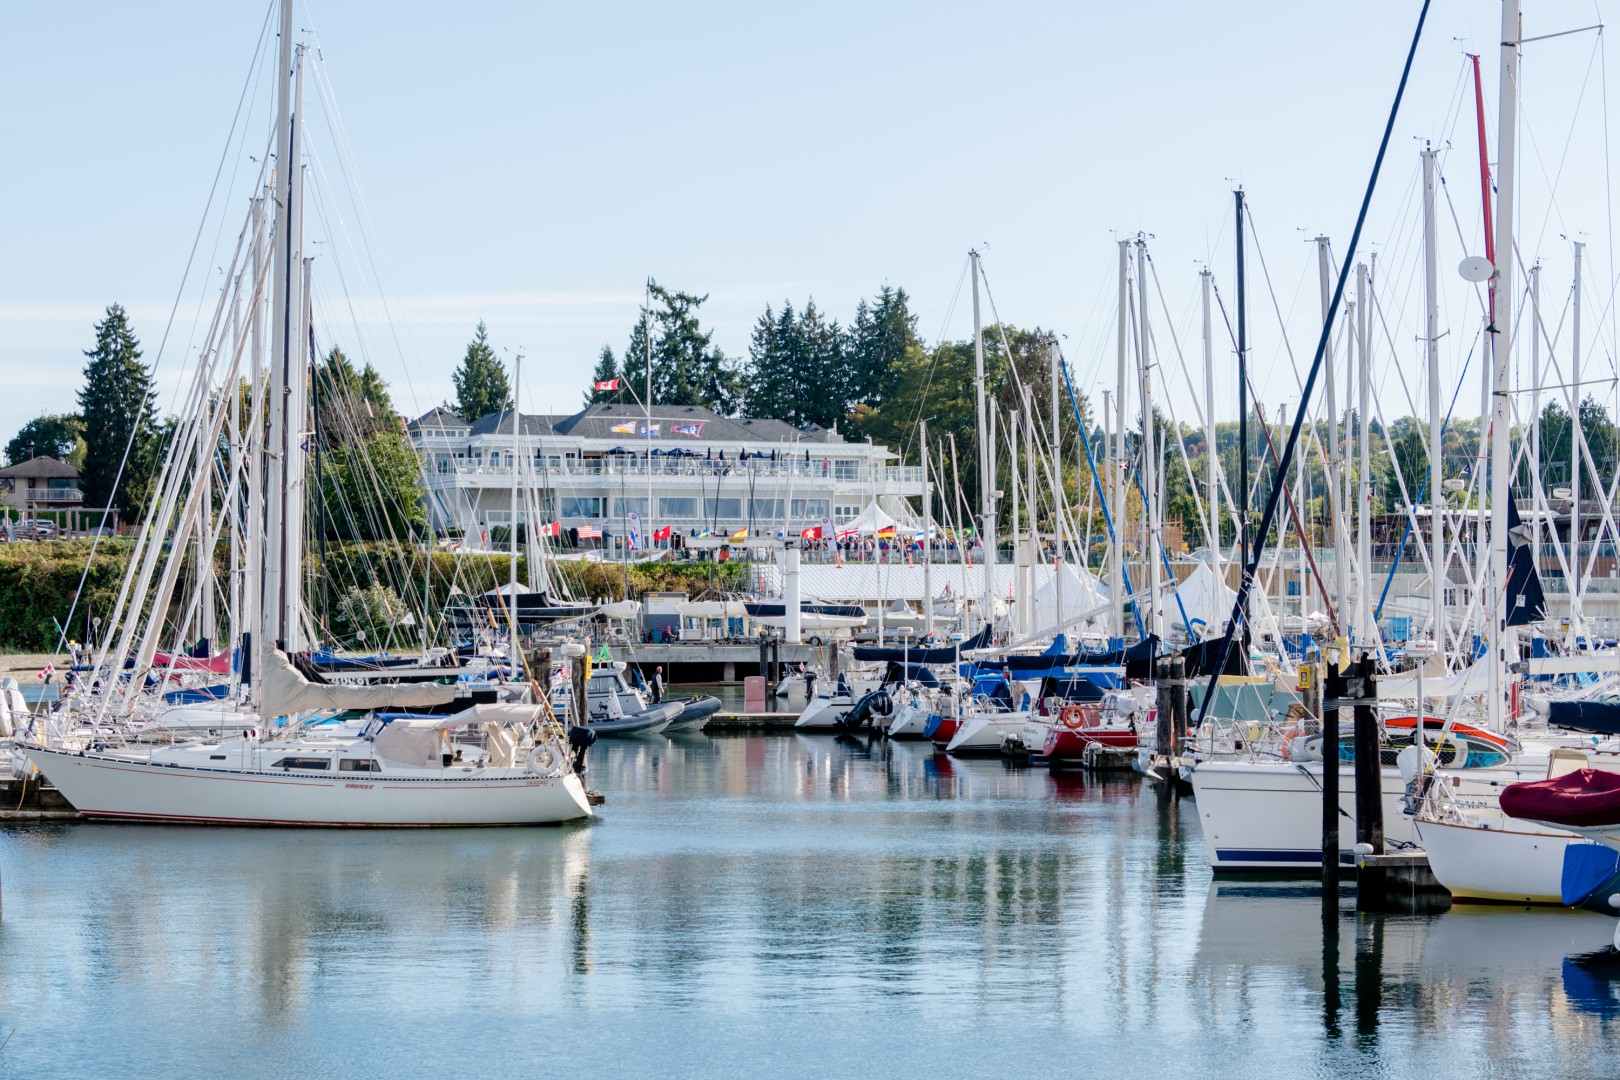 Youth Movement leads Royal Vancouver Yacht Club's